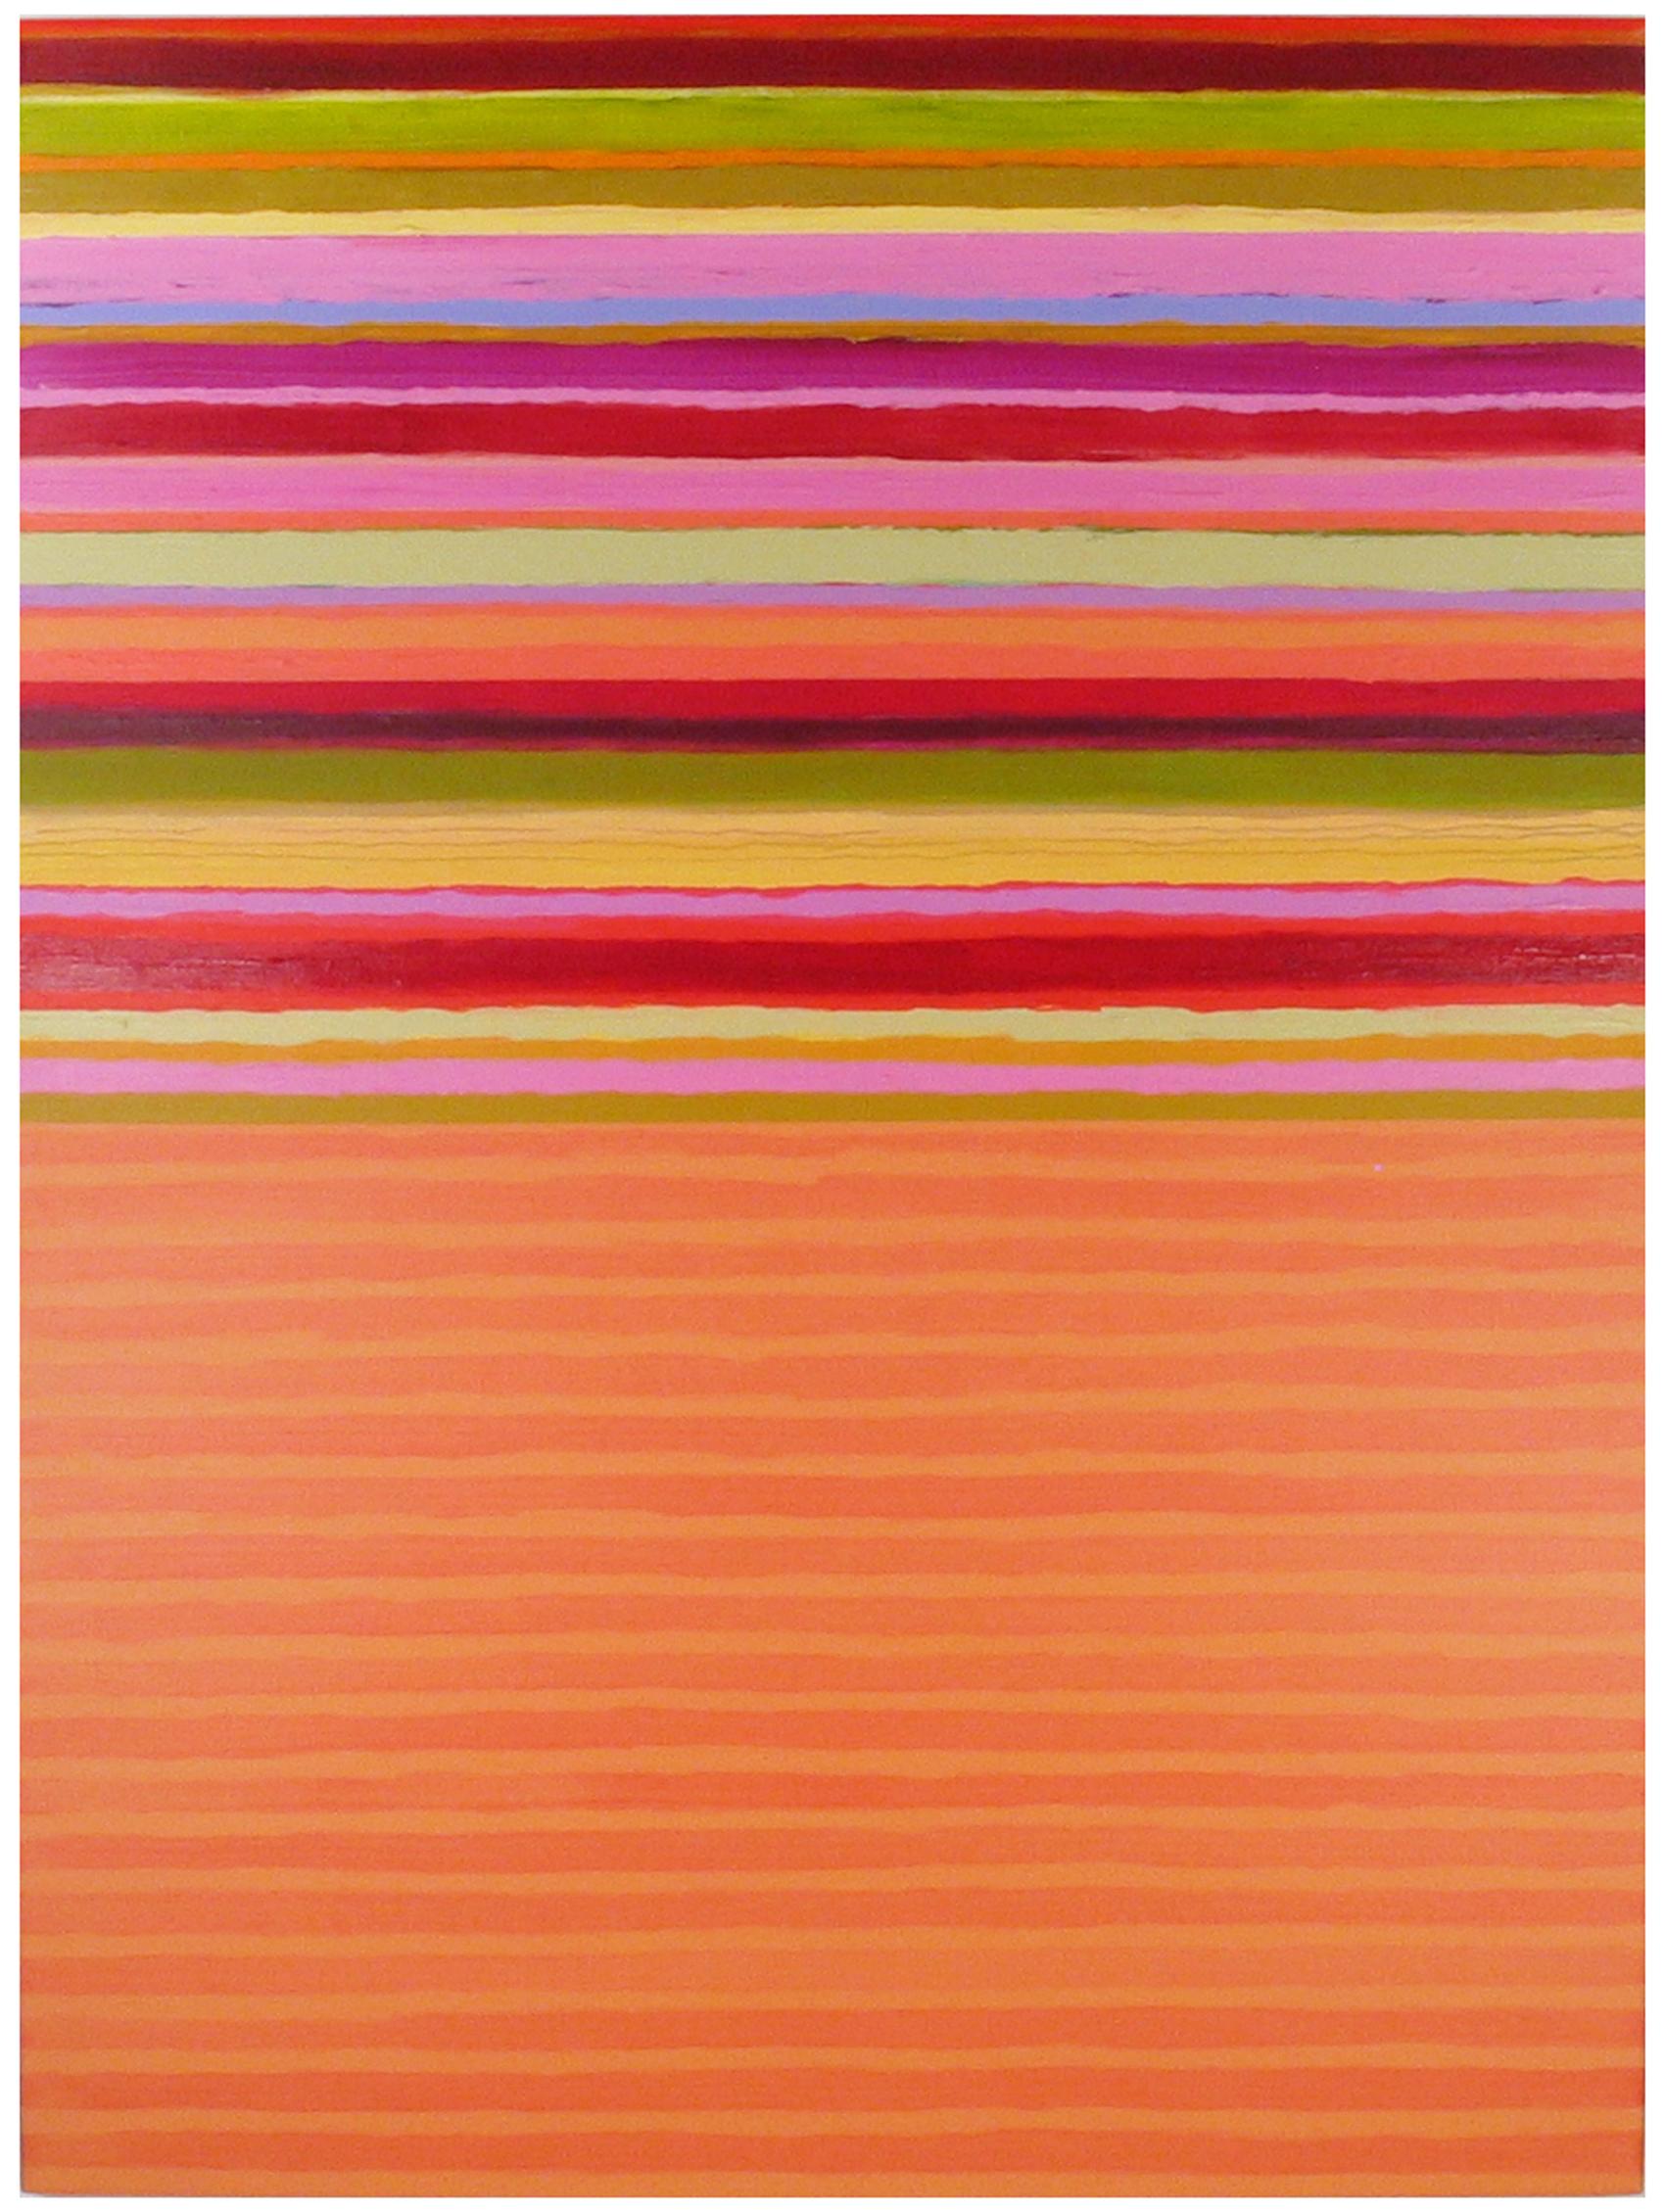 A bright multicolored painting with lime green, periwinkle, golden orange, yellow and burgundy red stripes against a luminous coral background. Signed, dated and titled on verso.

Joanne Mattera’s paintings can be described as lush minimalism, the